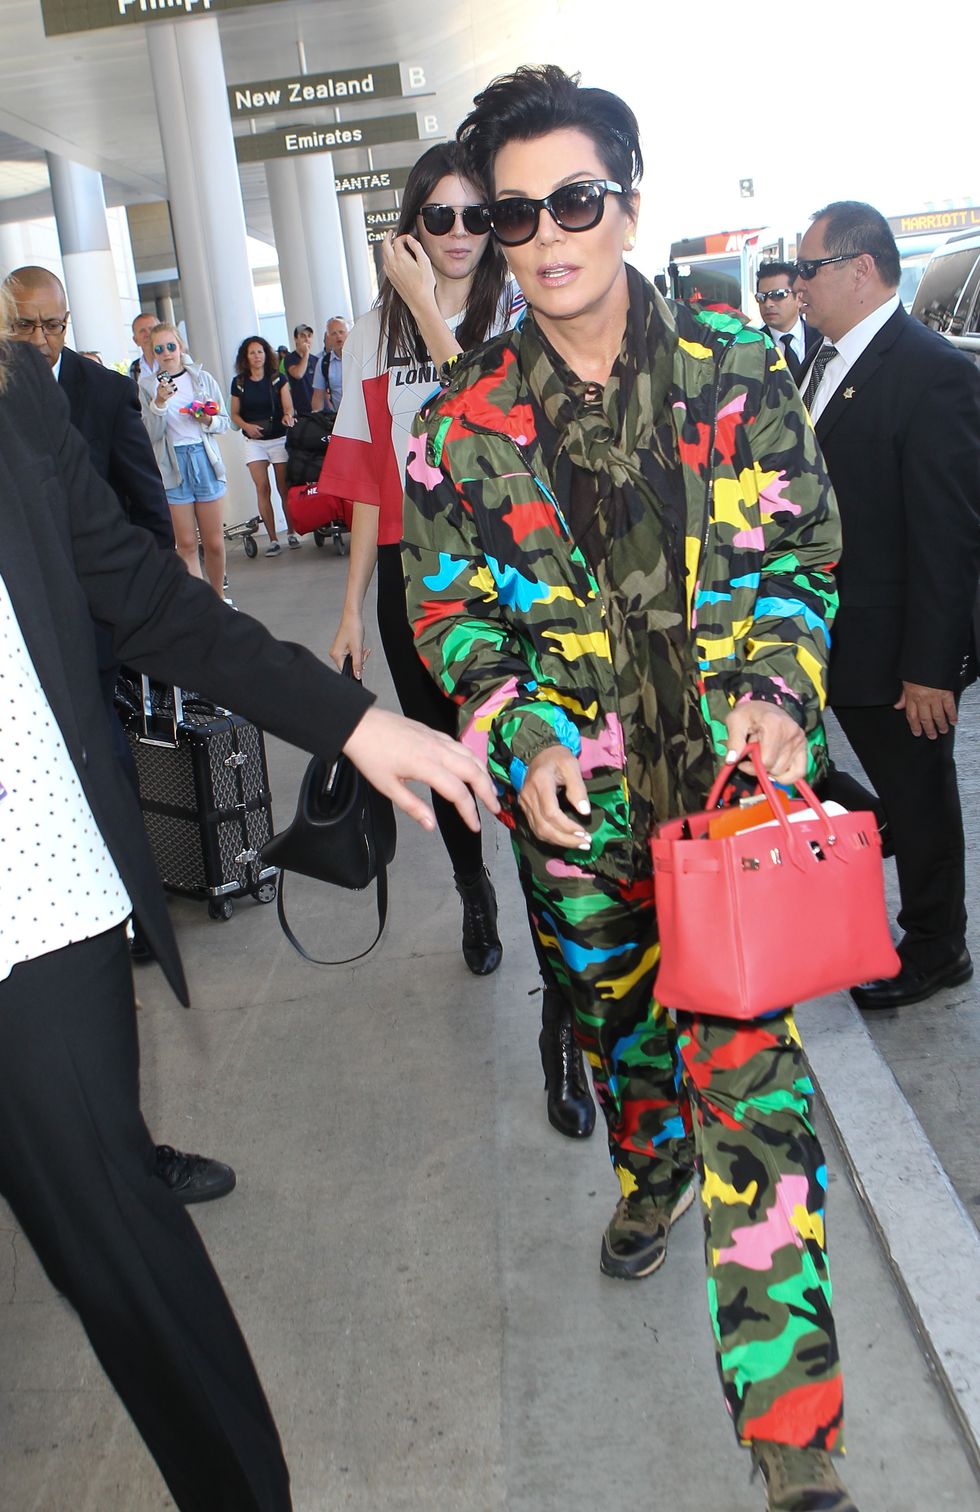 Kris Jenner wearing an all camouflage outfit at the airport